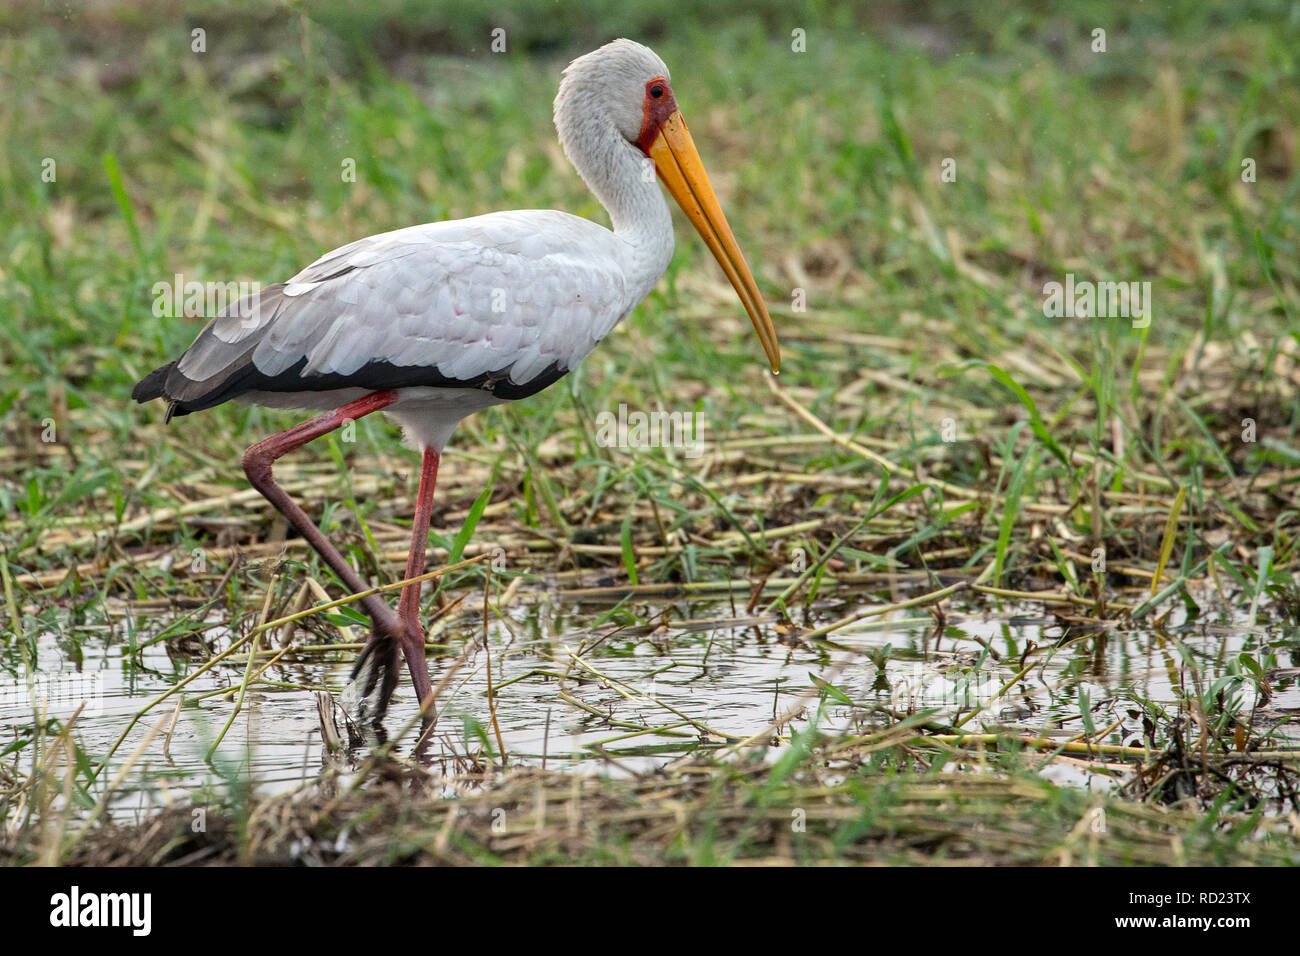 The yellow-billed stork, wood stork or wood ibis(Mycteria ibis) in the shallows of the Chobe River. Stock Photo